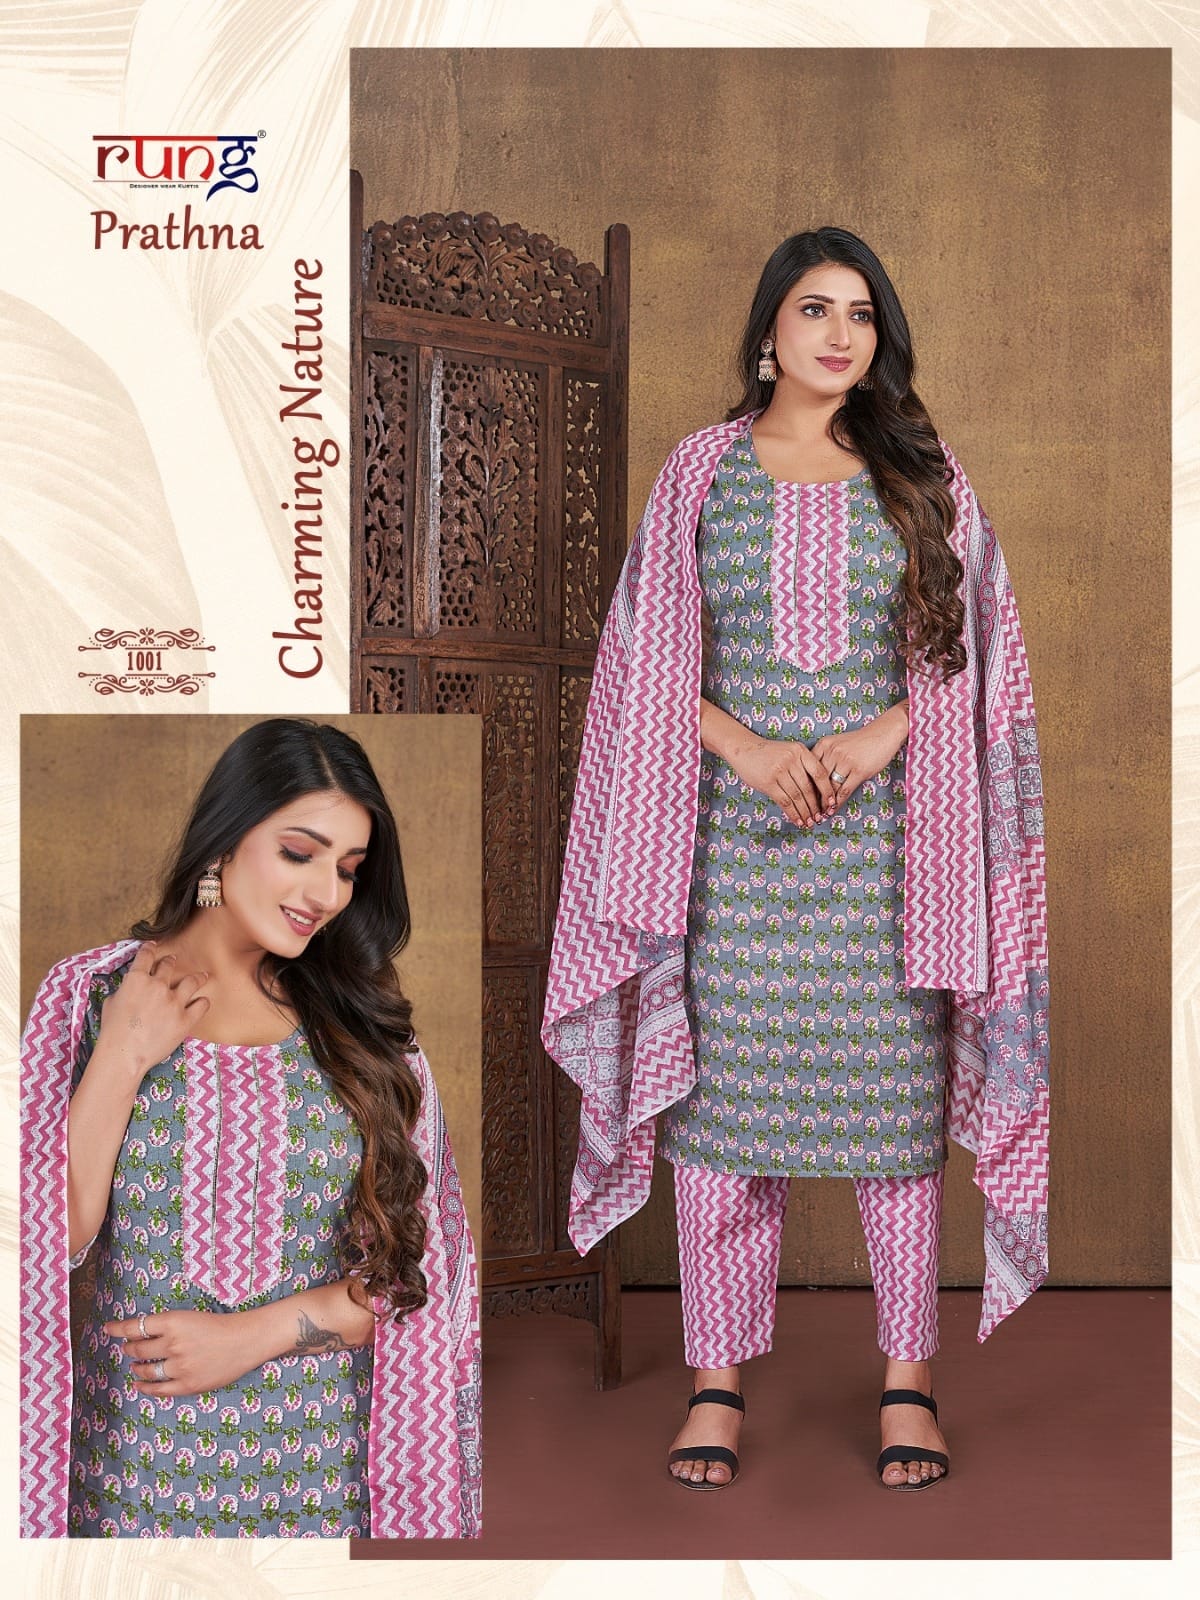 Prathna Rung Cotton Readymade Pant Style Suits